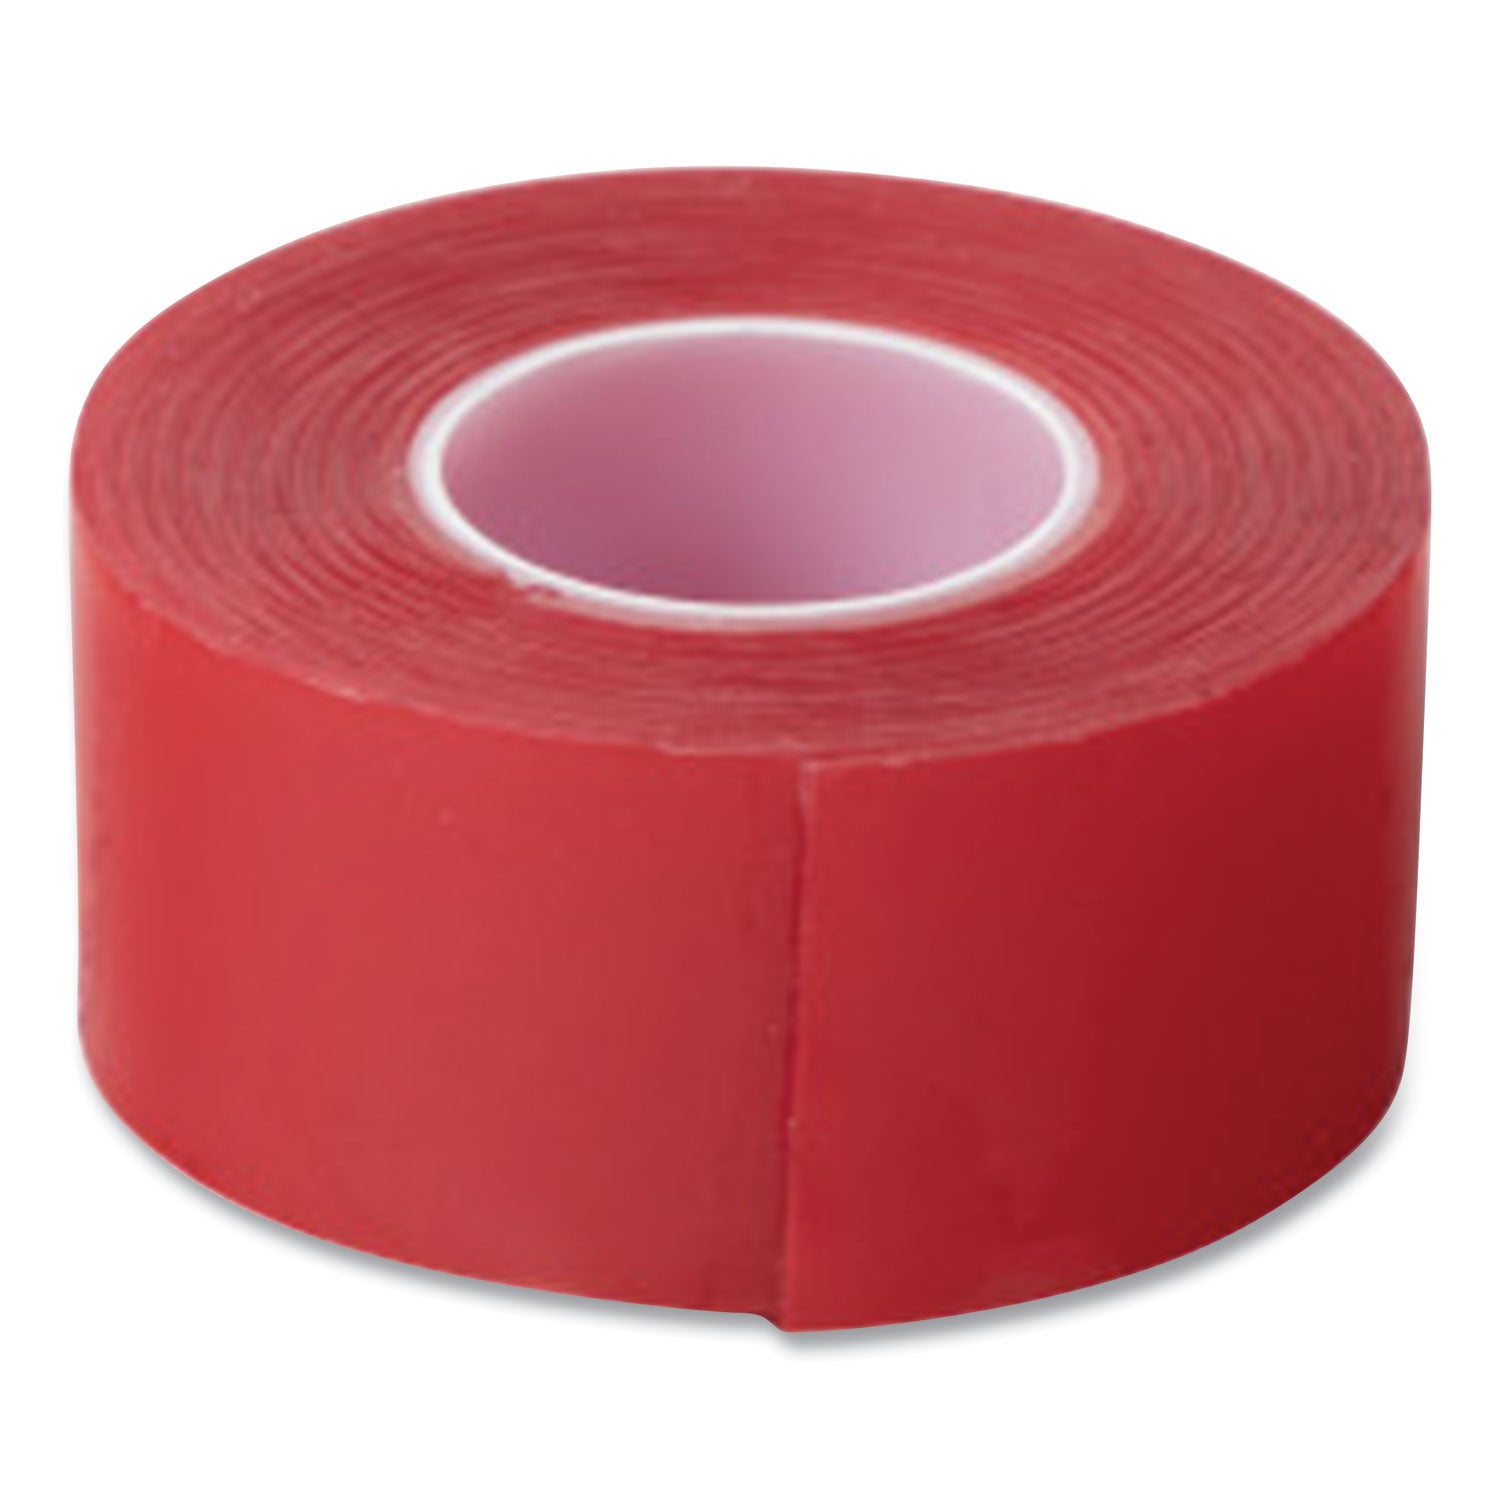 strong-mounting-tape-permanent-holds-up-to-05-lb-per-inch-1-x-60-clear_duc285338 - 1